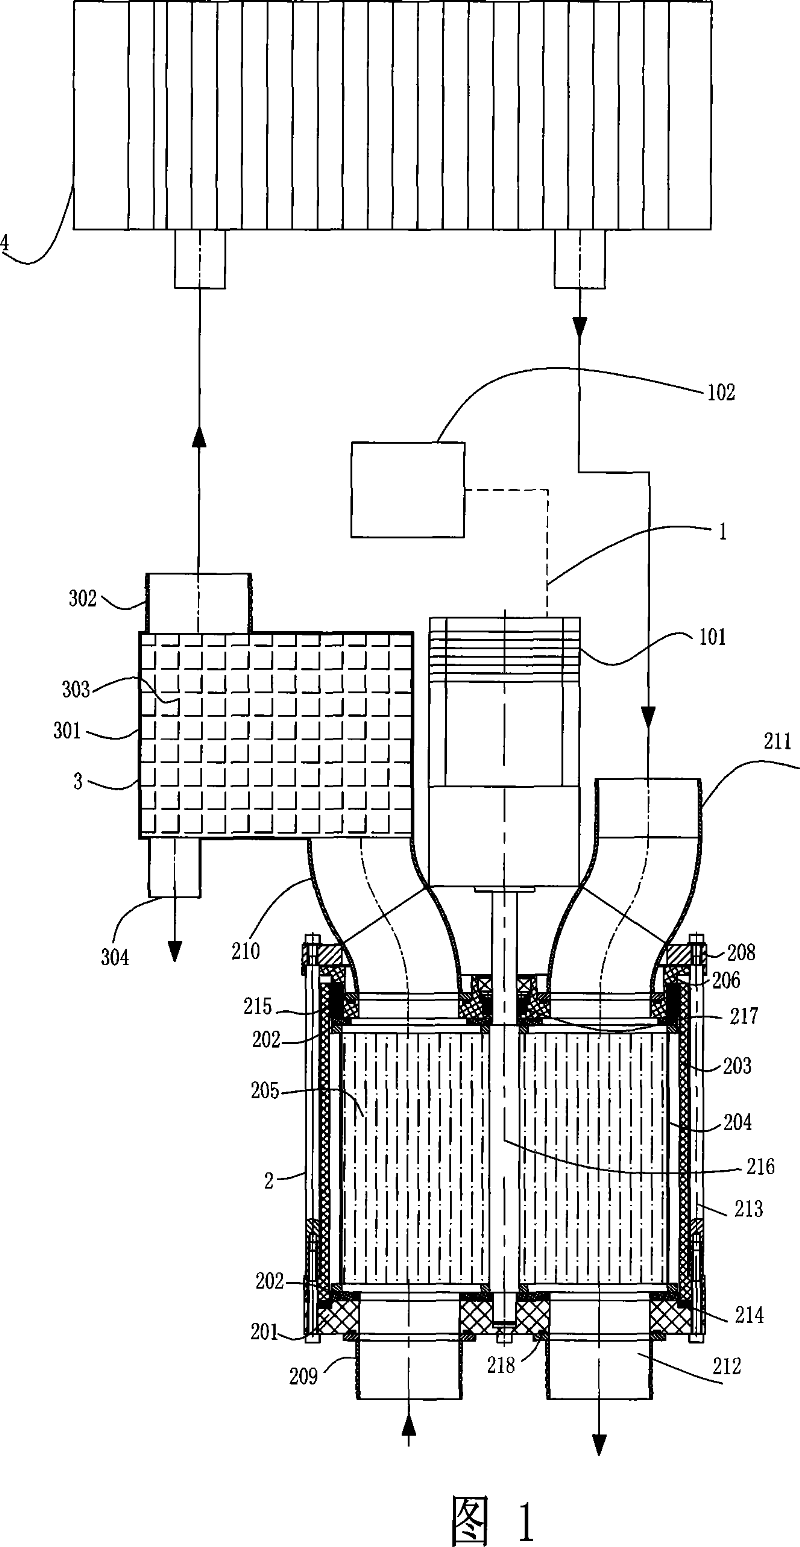 Air humid enthalpyconverting device used for fuel batter with proton exchange film